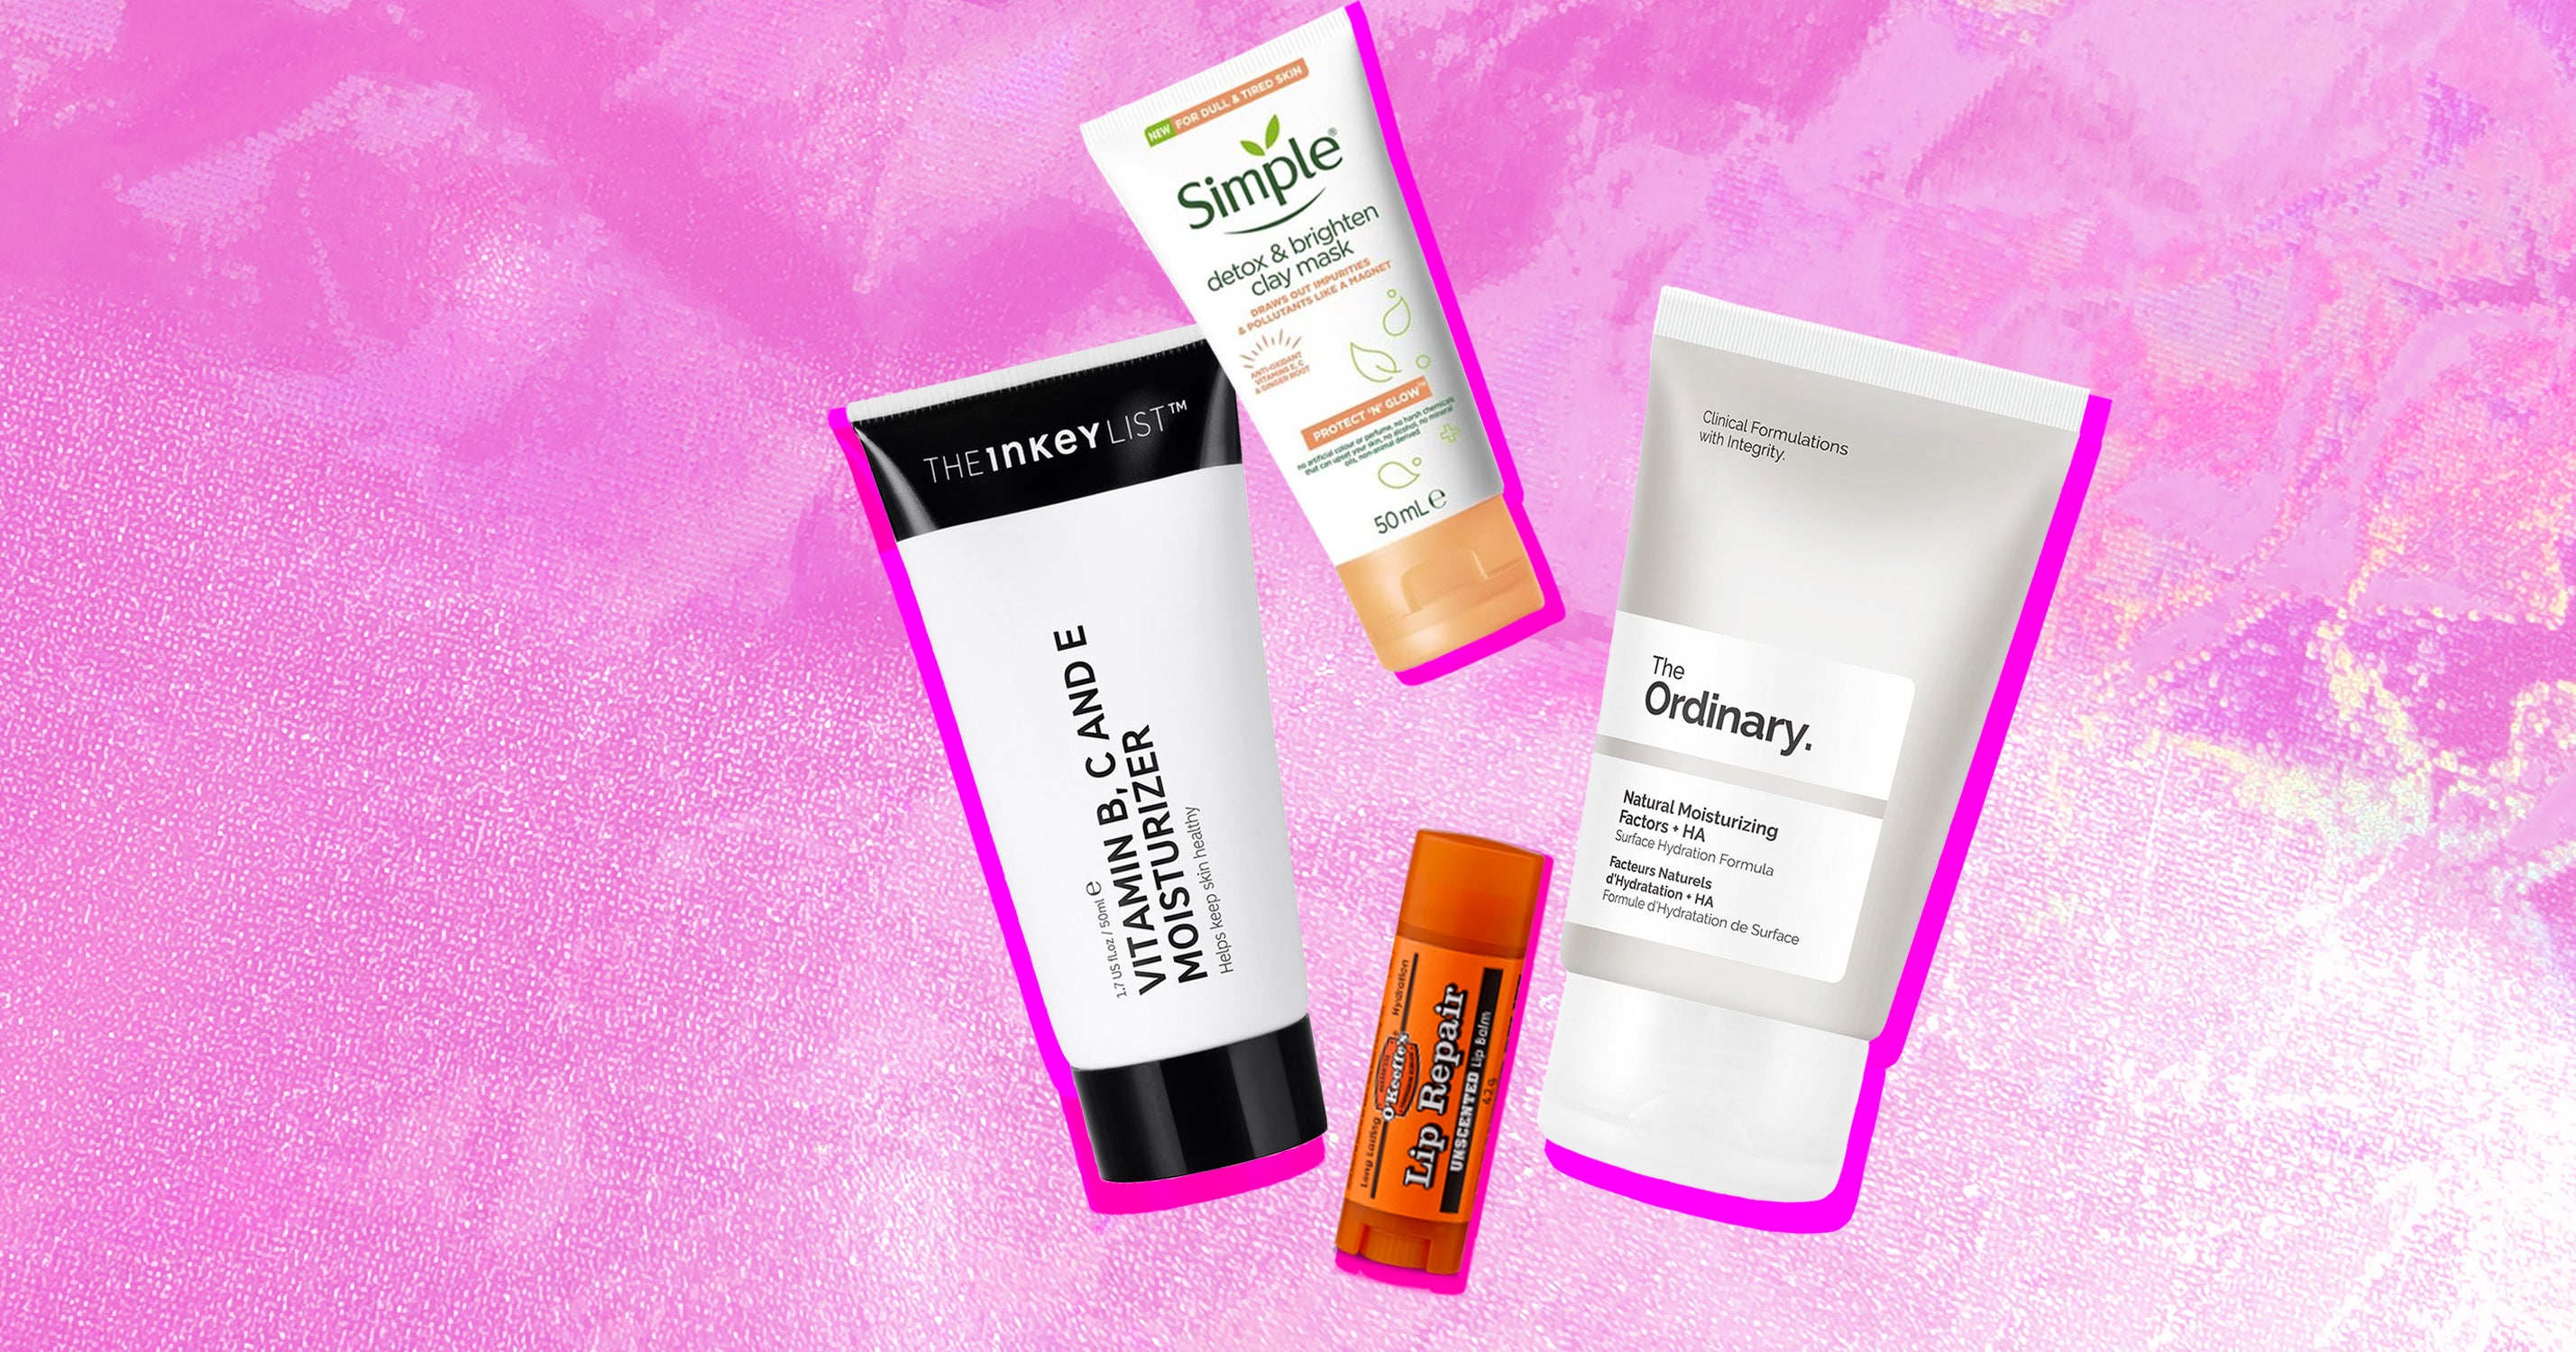 The Best Skincare Under £5 According To A Beauty Editor